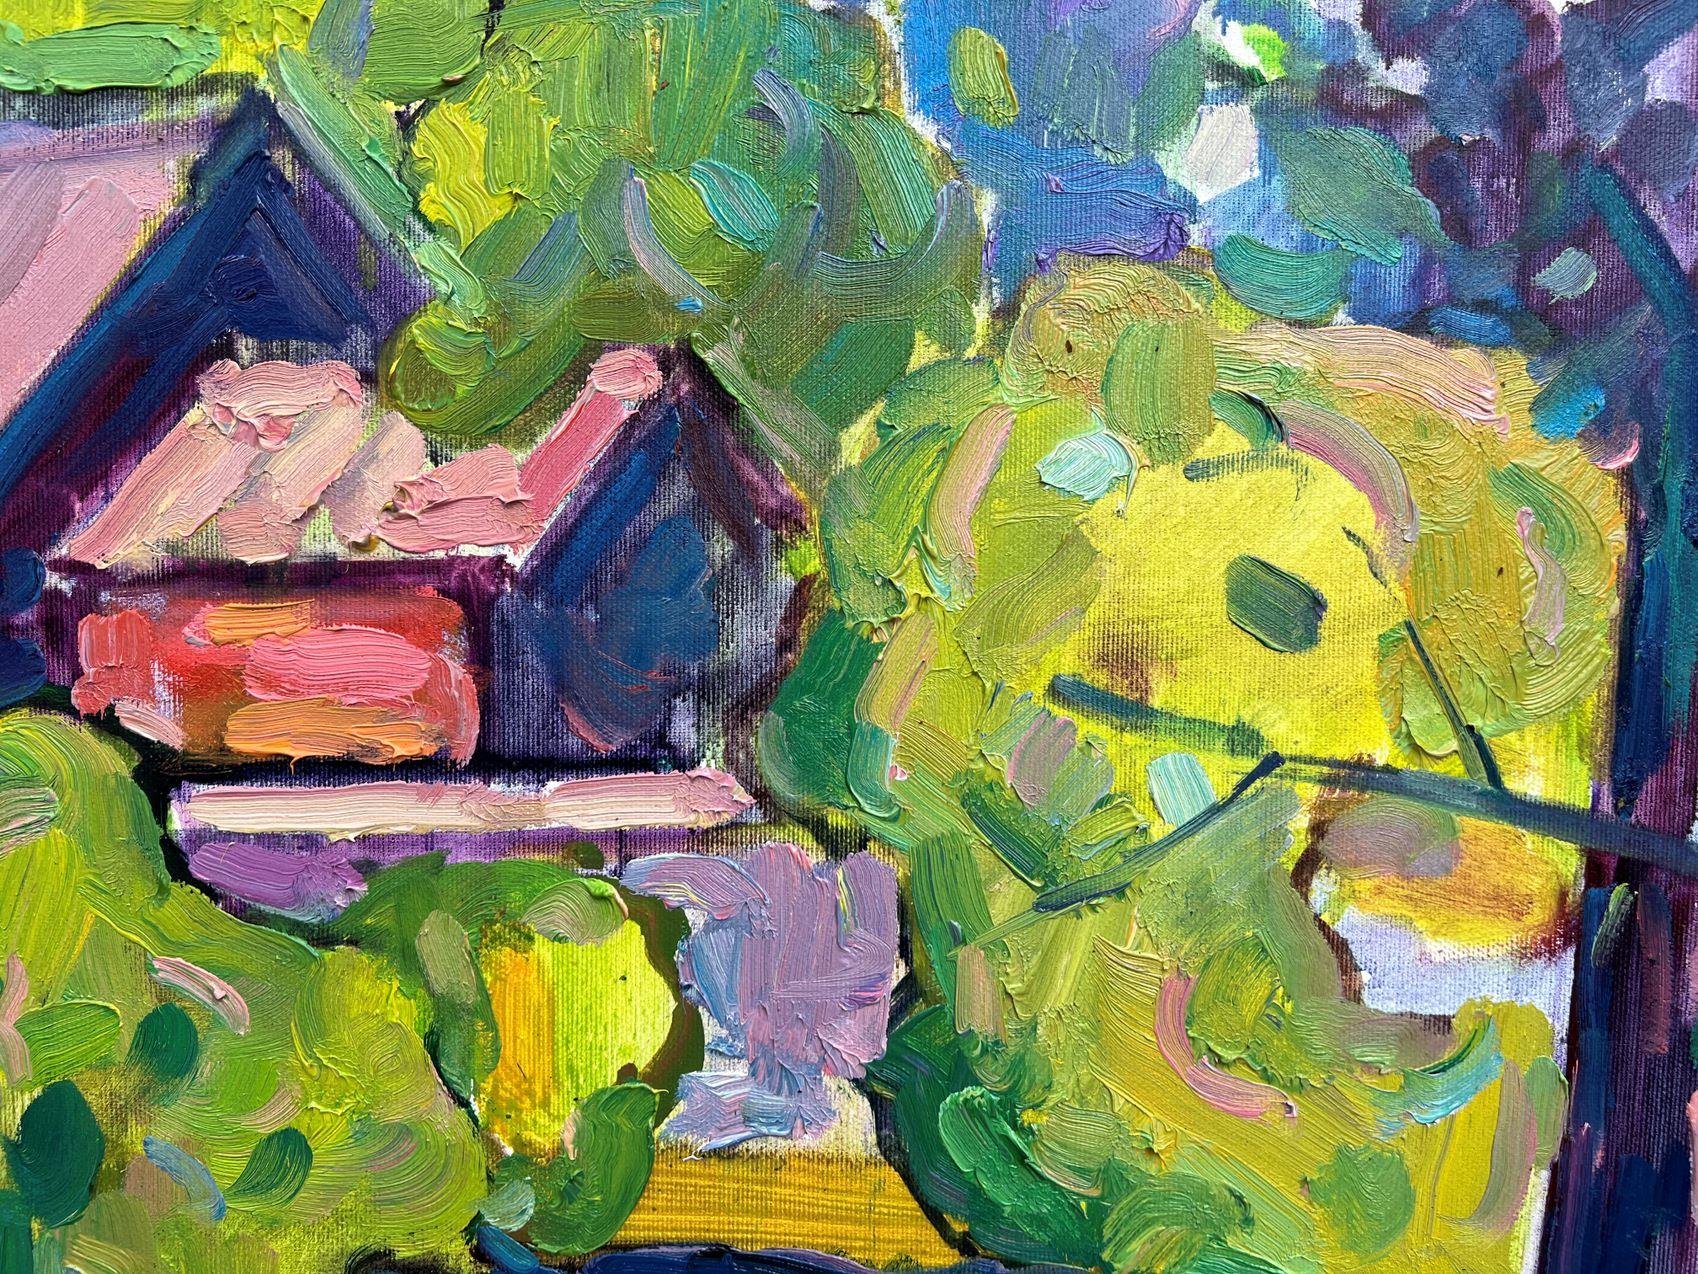 Artist: Peter Tovpev
Work: Original oil painting, handmade artwork, one of a kind 
Medium: Oil on Canvas 
Year: 2021
Style: Post Impressionism
Title: Lonely House
Size: 29.5